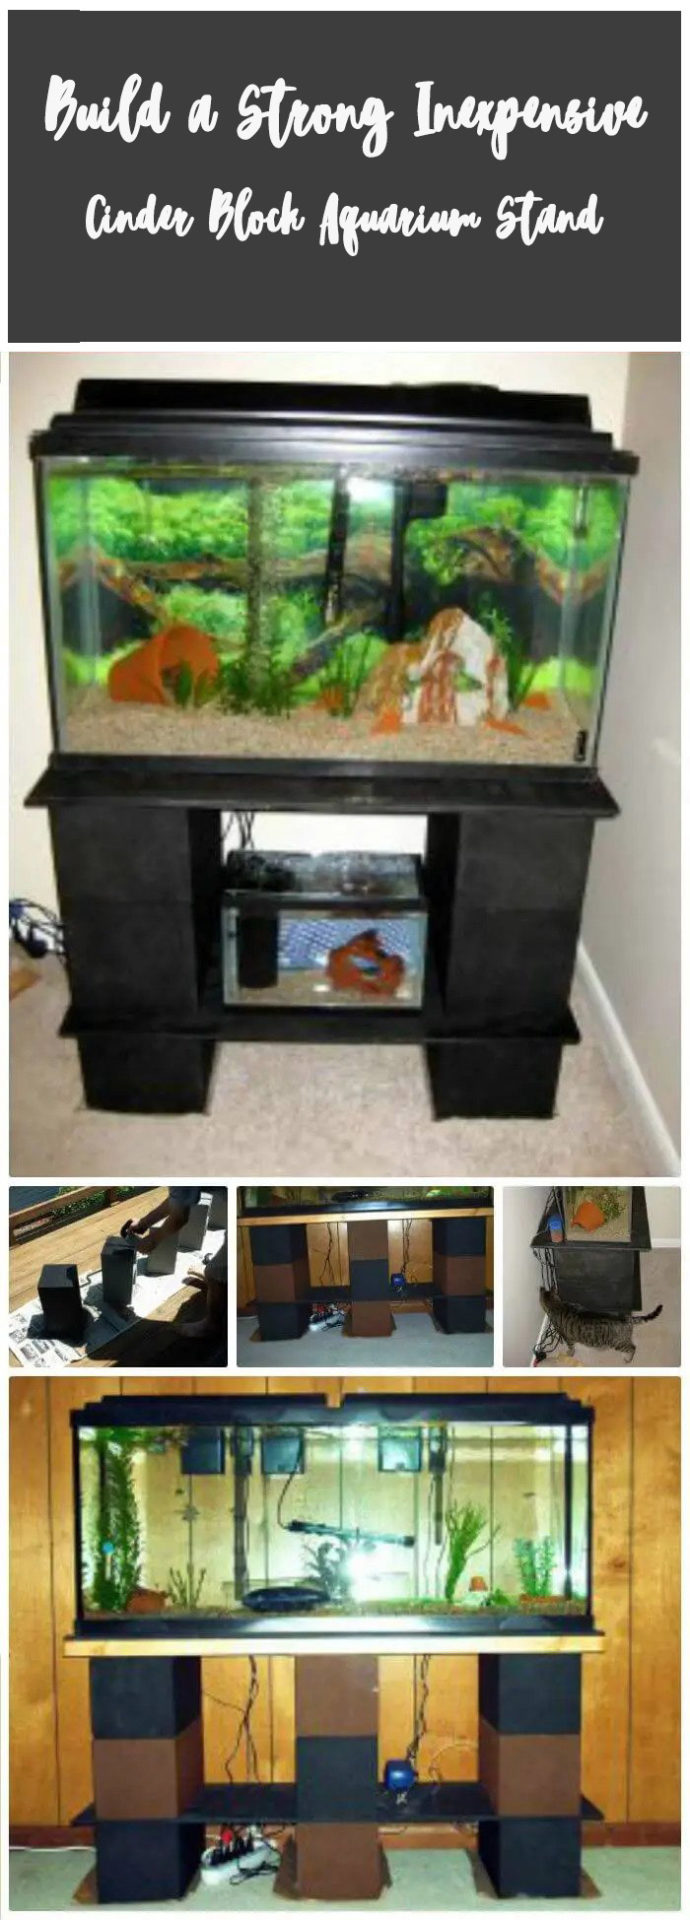 Build a Strong, Inexpensive Aquarium Stand